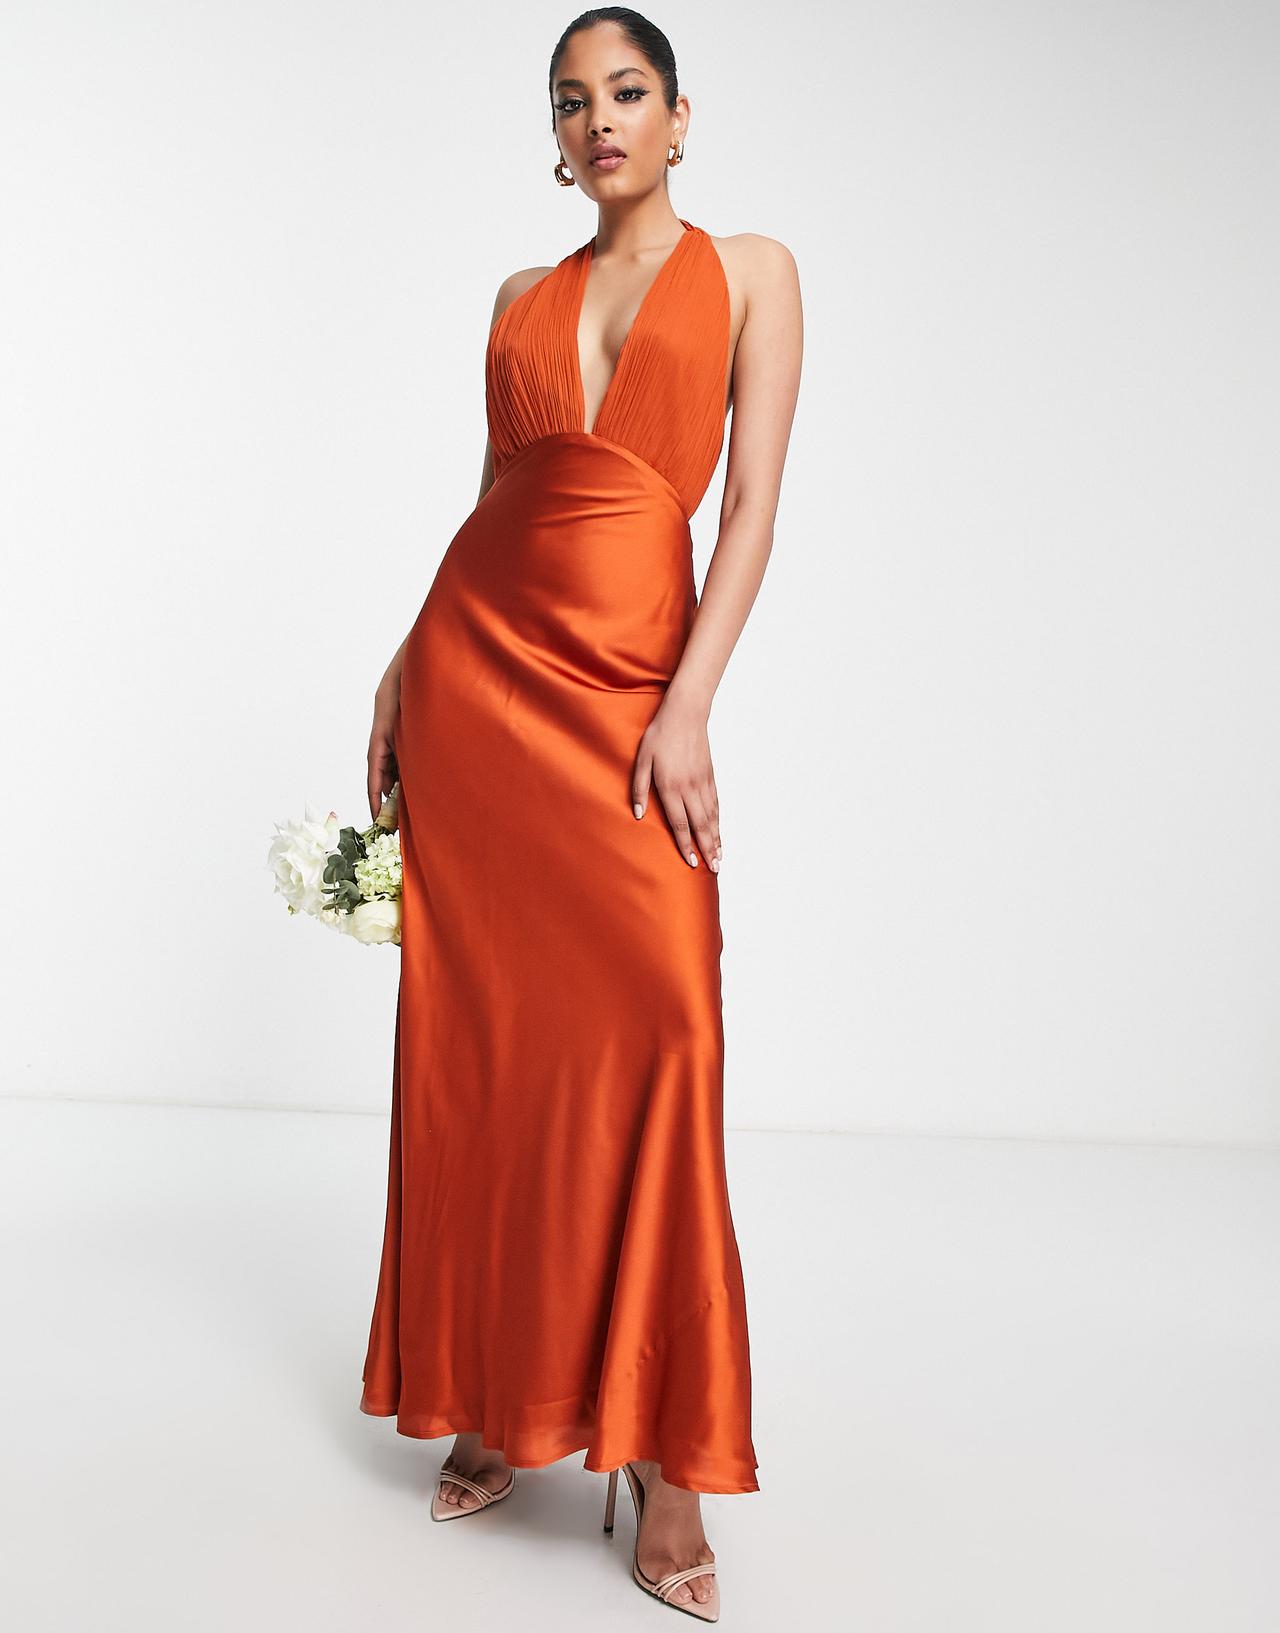 15 Rust Bridesmaid Dresses for Every Style of Wedding - hitched.co